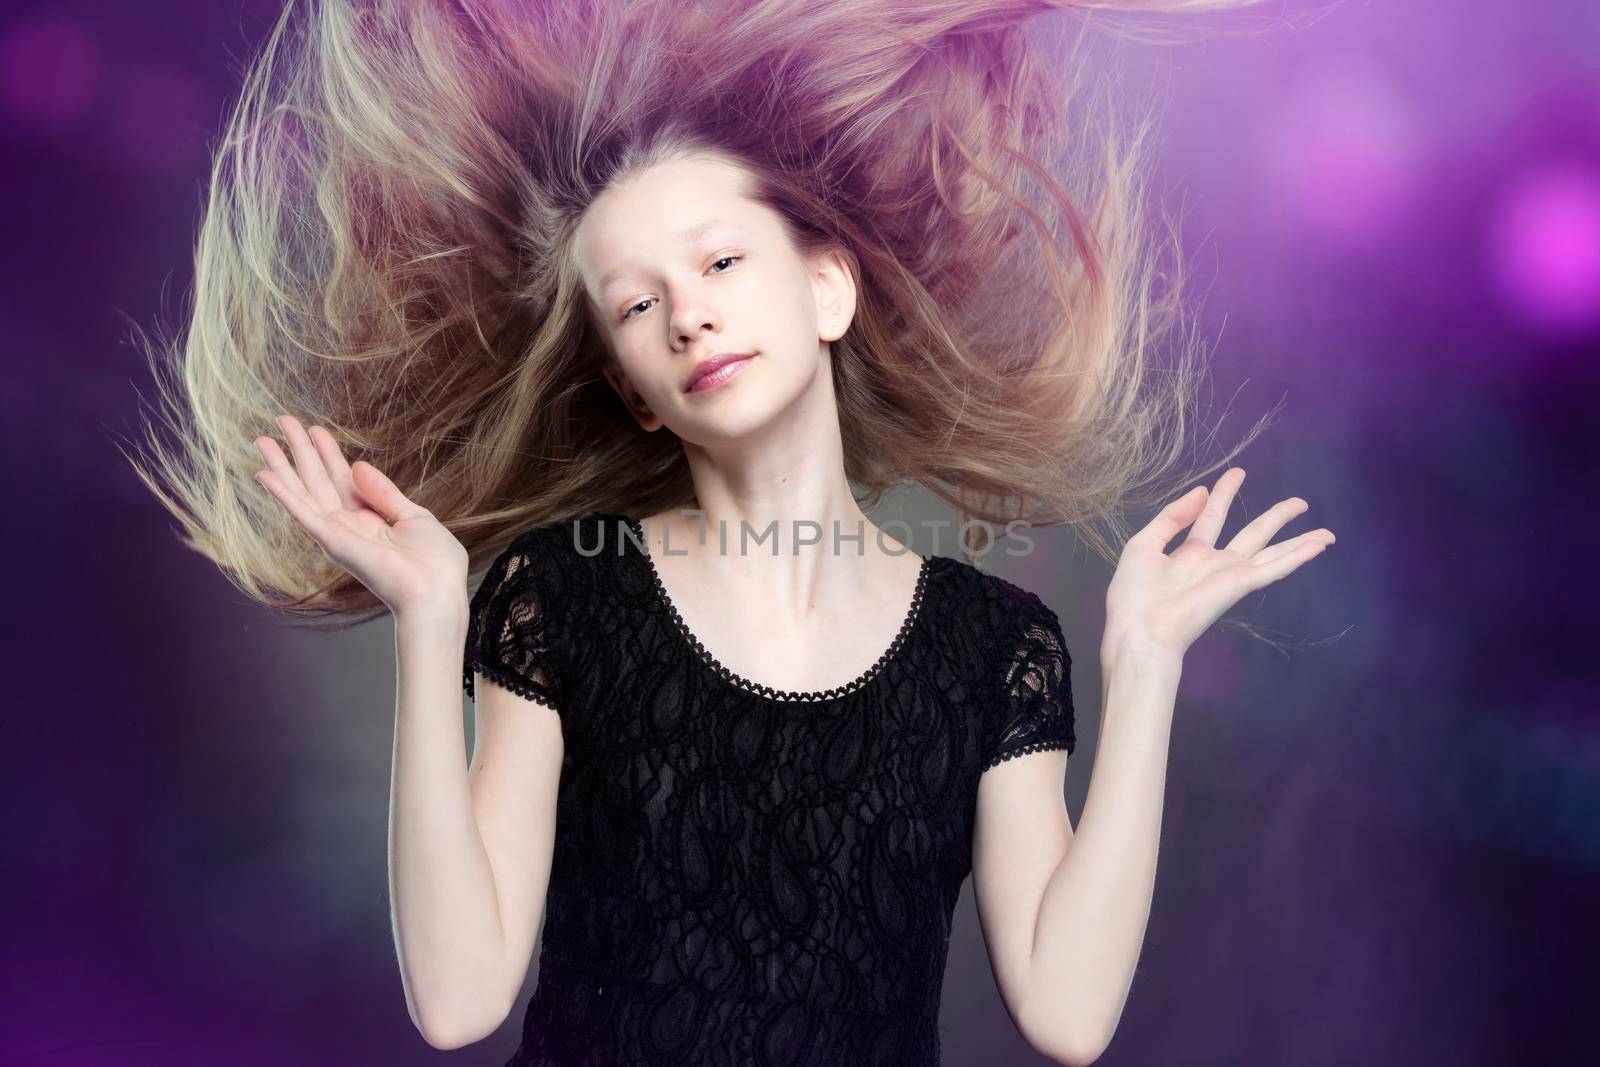 Against a purple background, a beautiful teenage girl flapped her hair.